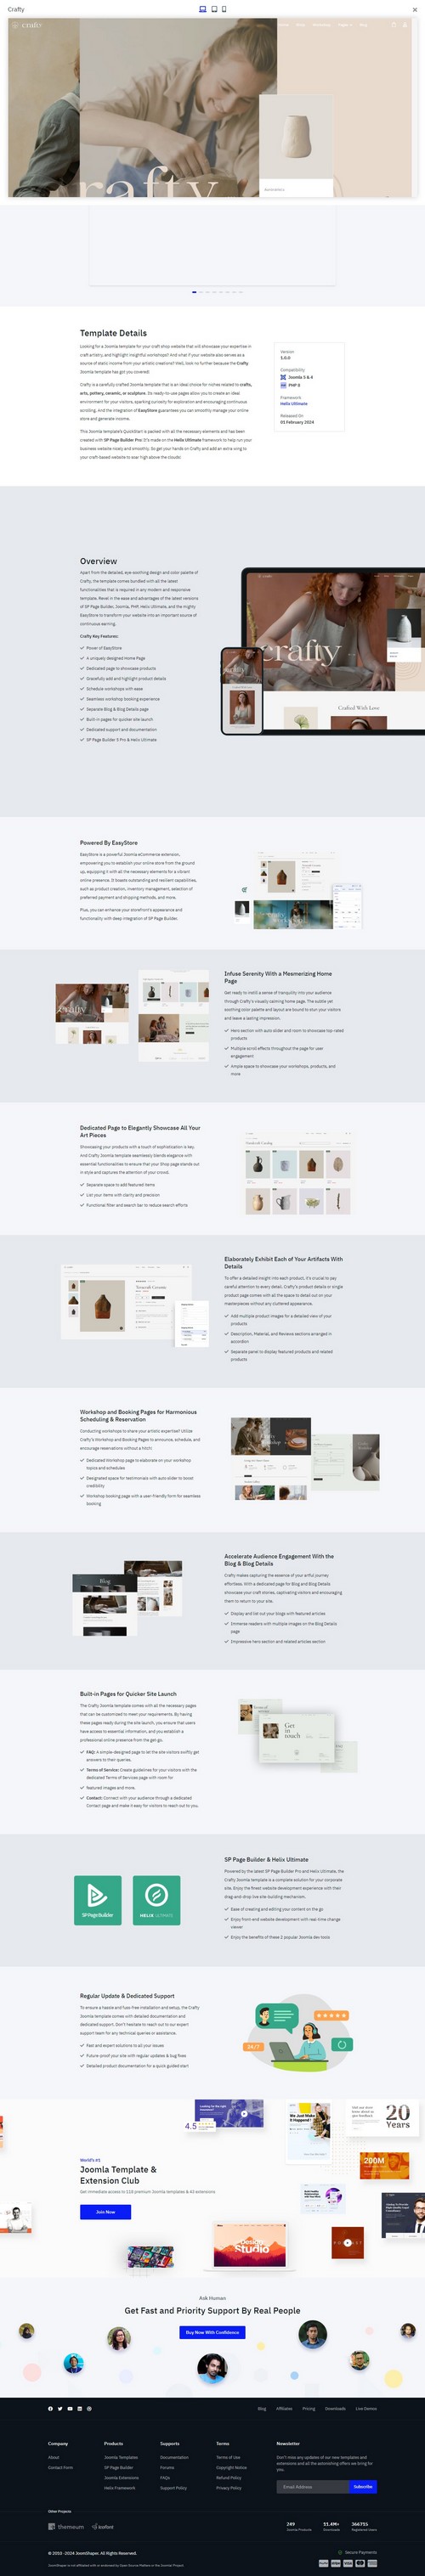 Crafty - Complete eCommerce template for crafts and pottery